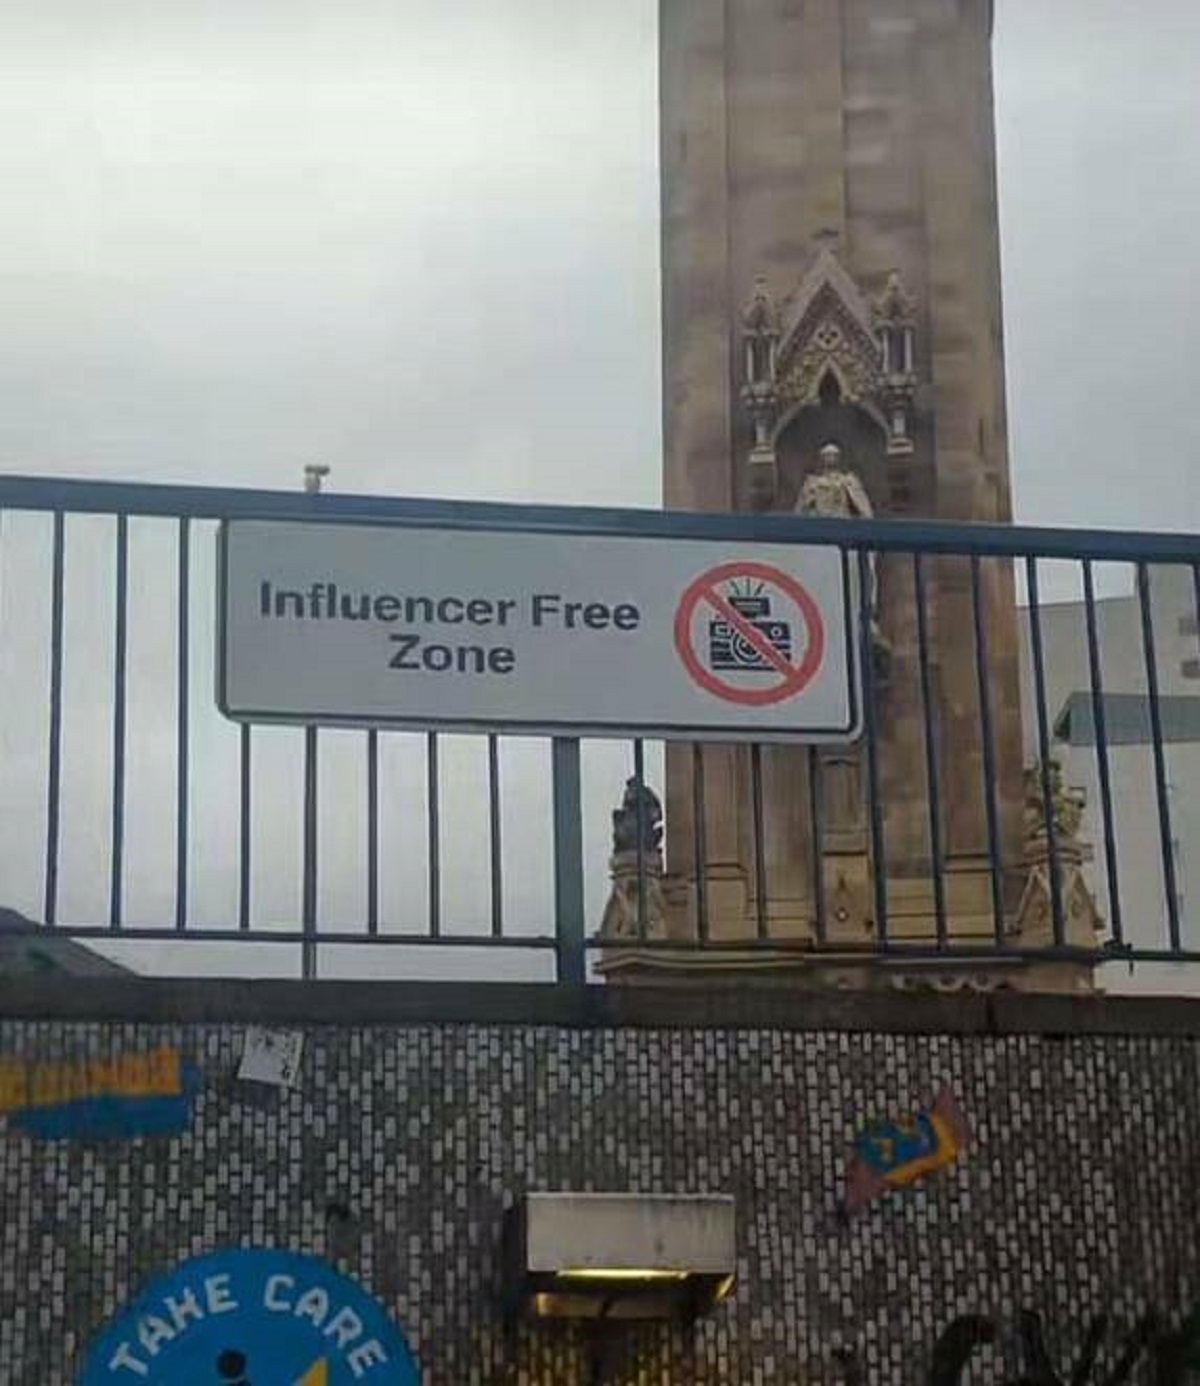 "This tunnel in Belfast is an "influencer free zone""